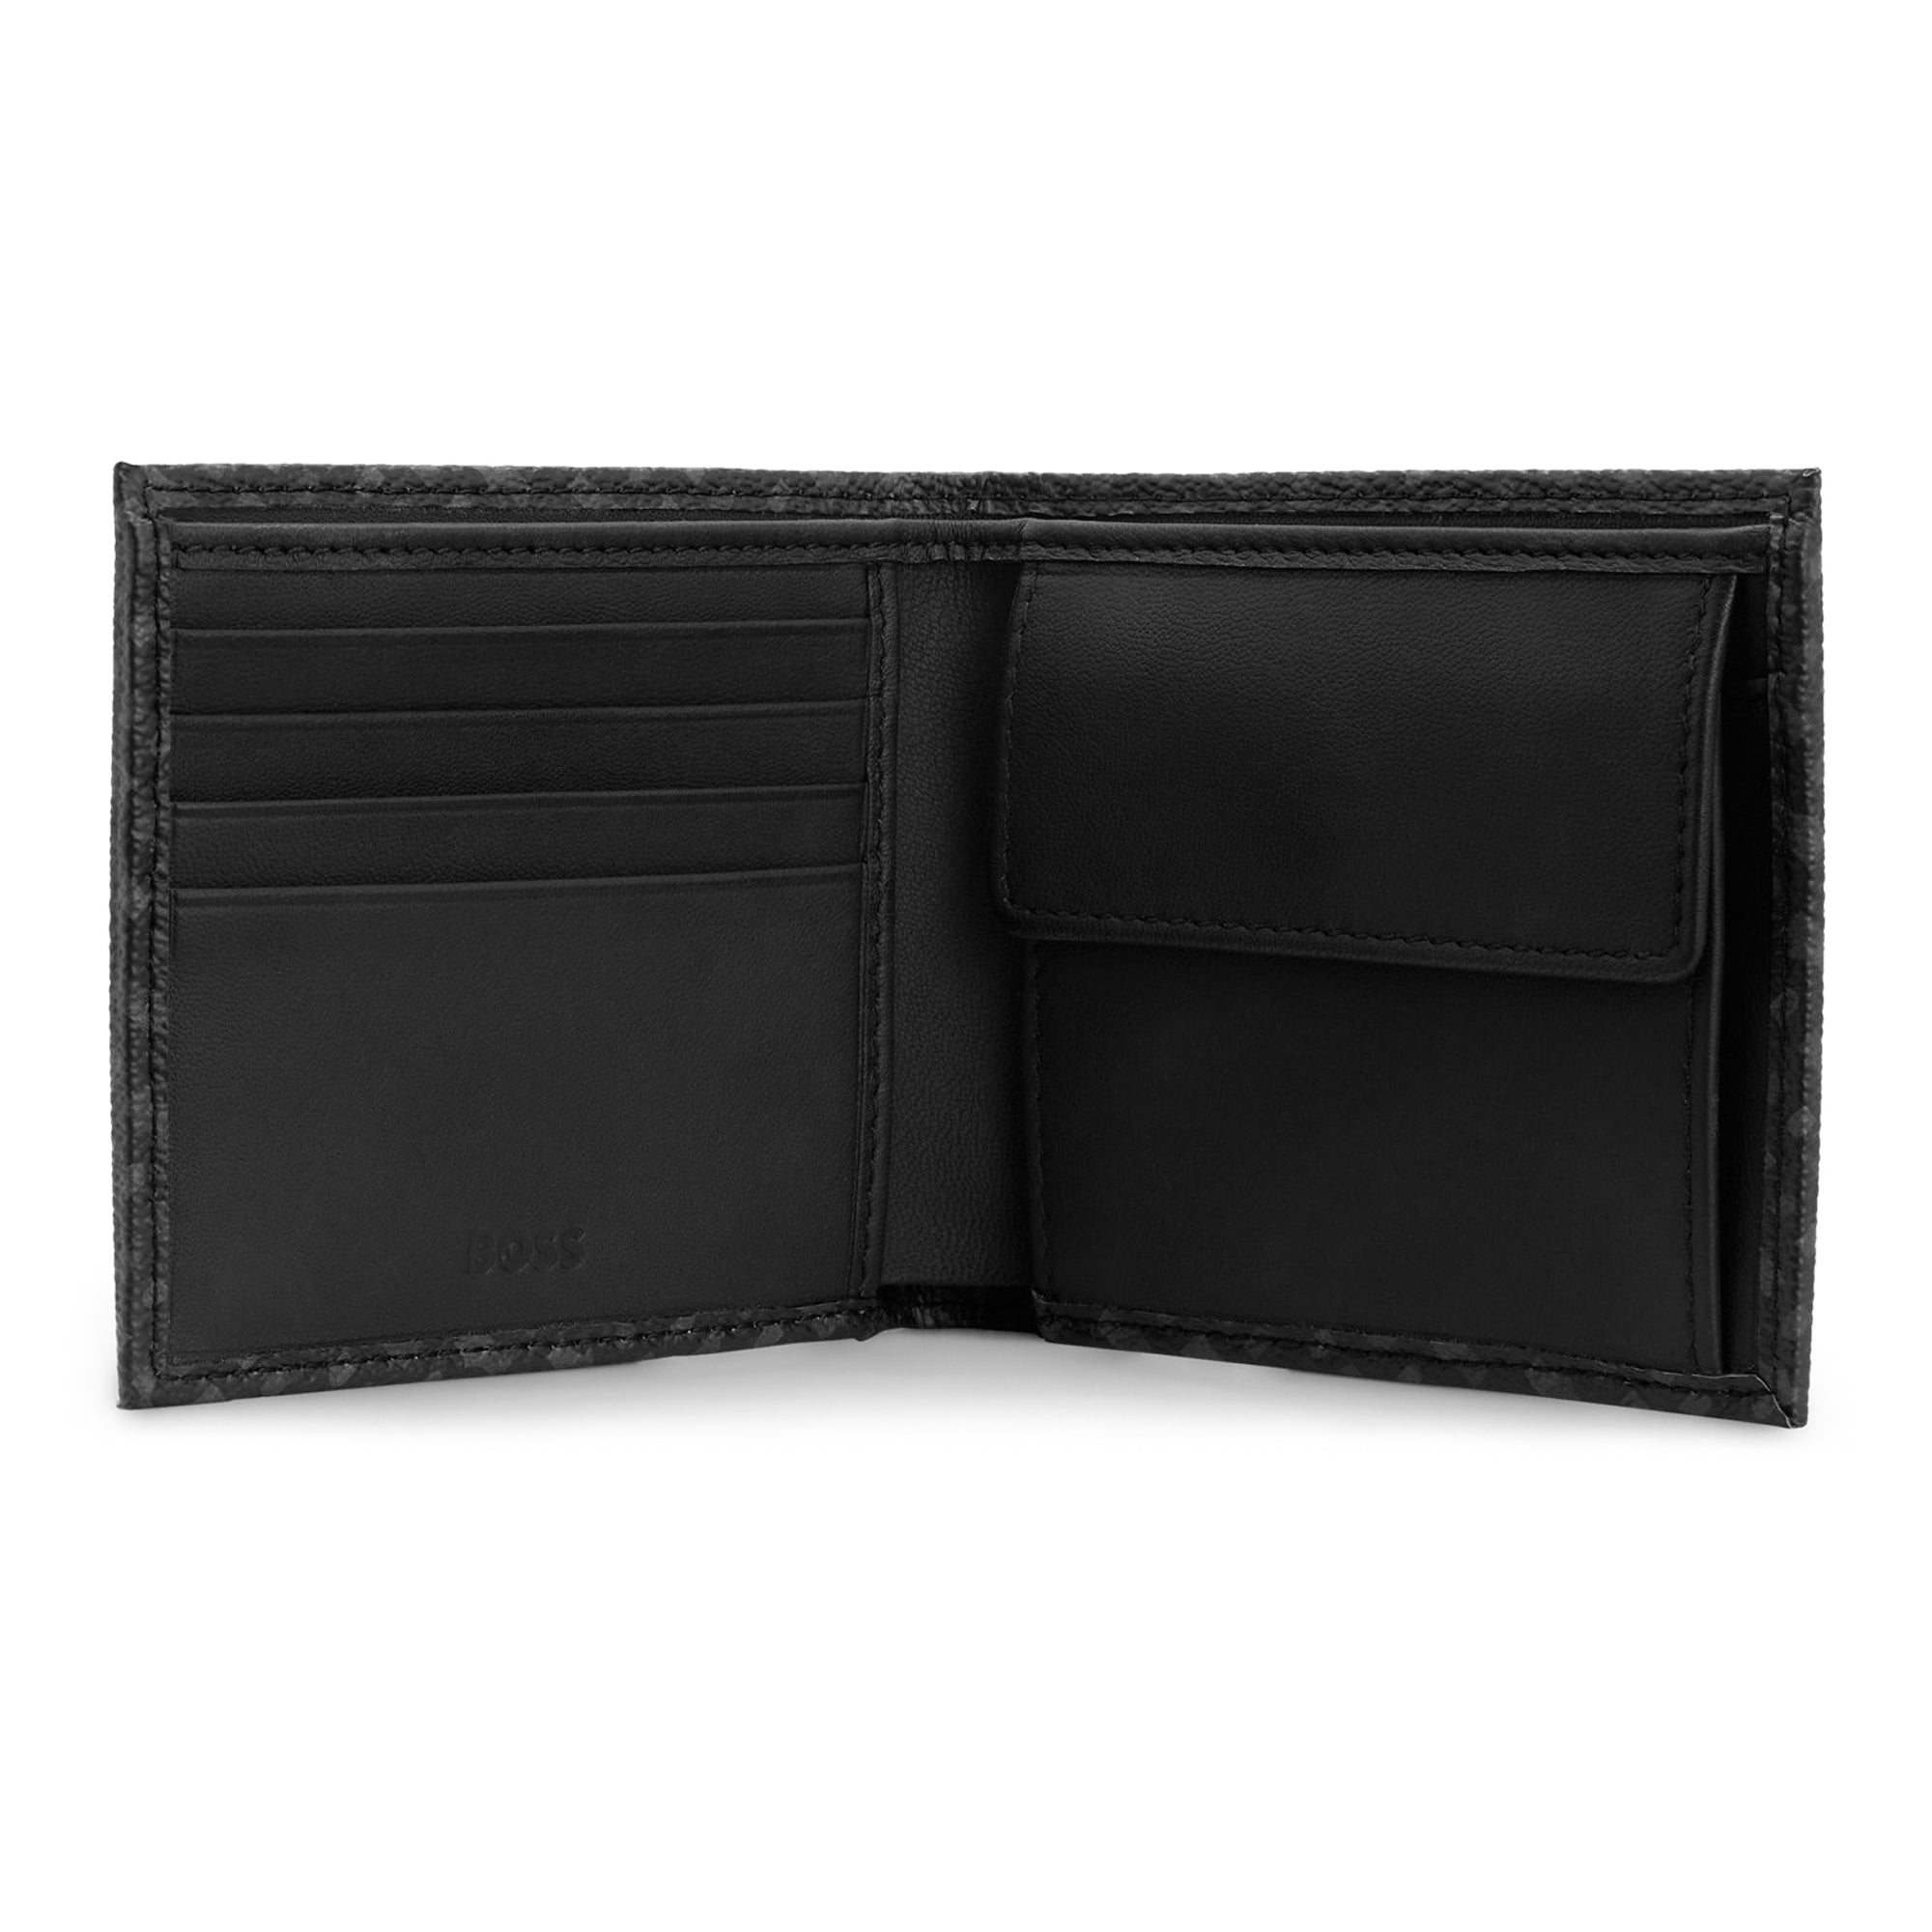 Boss Byron RFID 4 Card and Coin Wallet - Black/Grey AOP